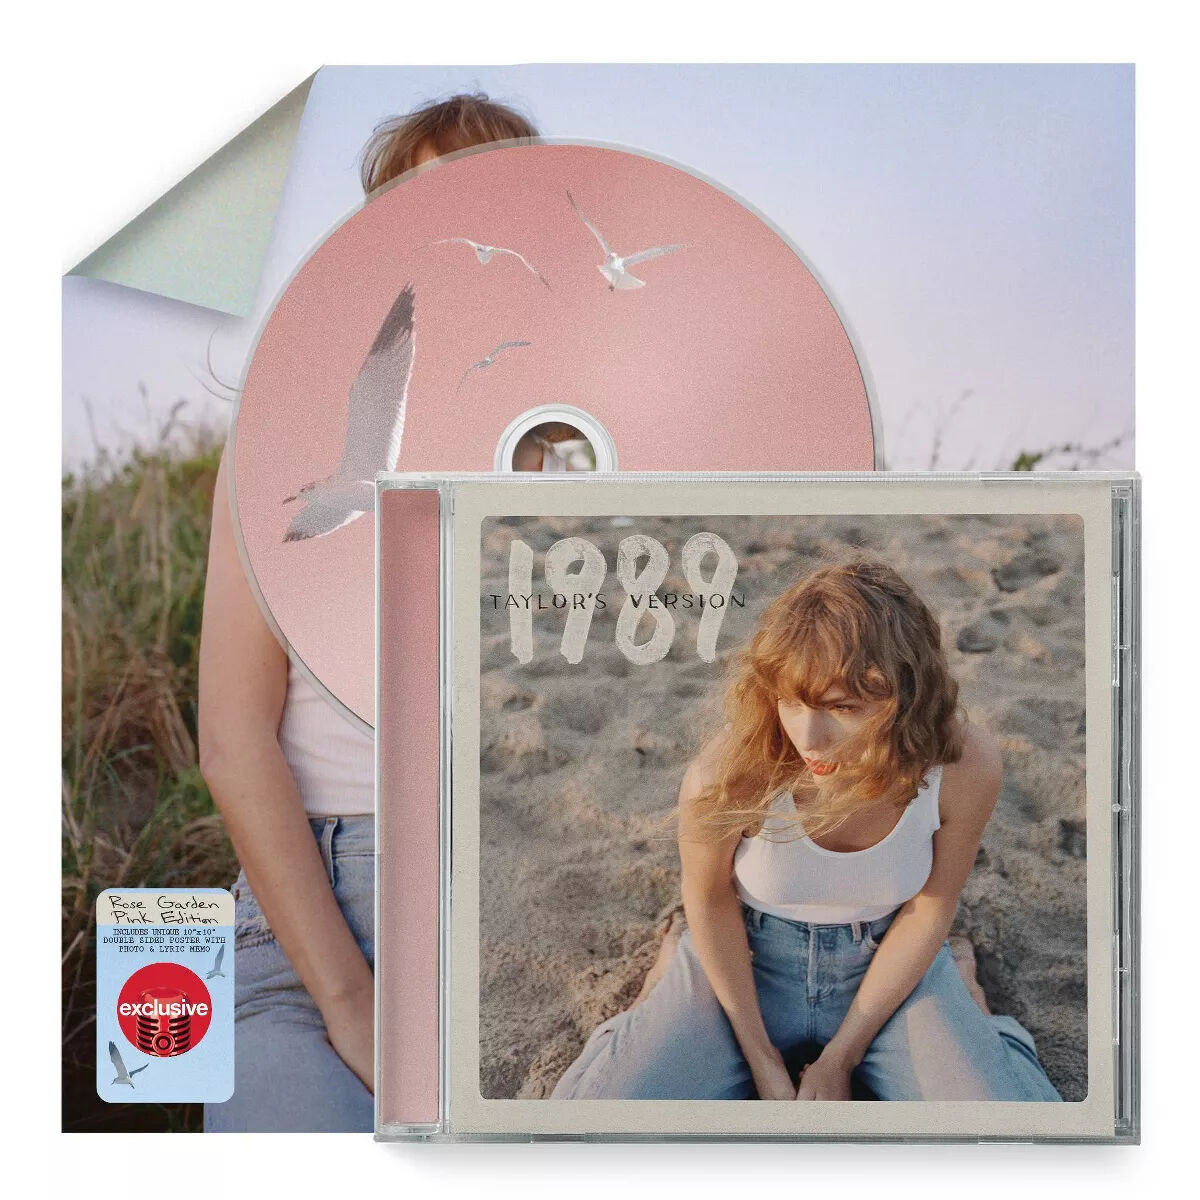 TAYLOR SWIFT 1989 (Taylor’s Version)Rose Garden Pink Deluxe Edition Target CD